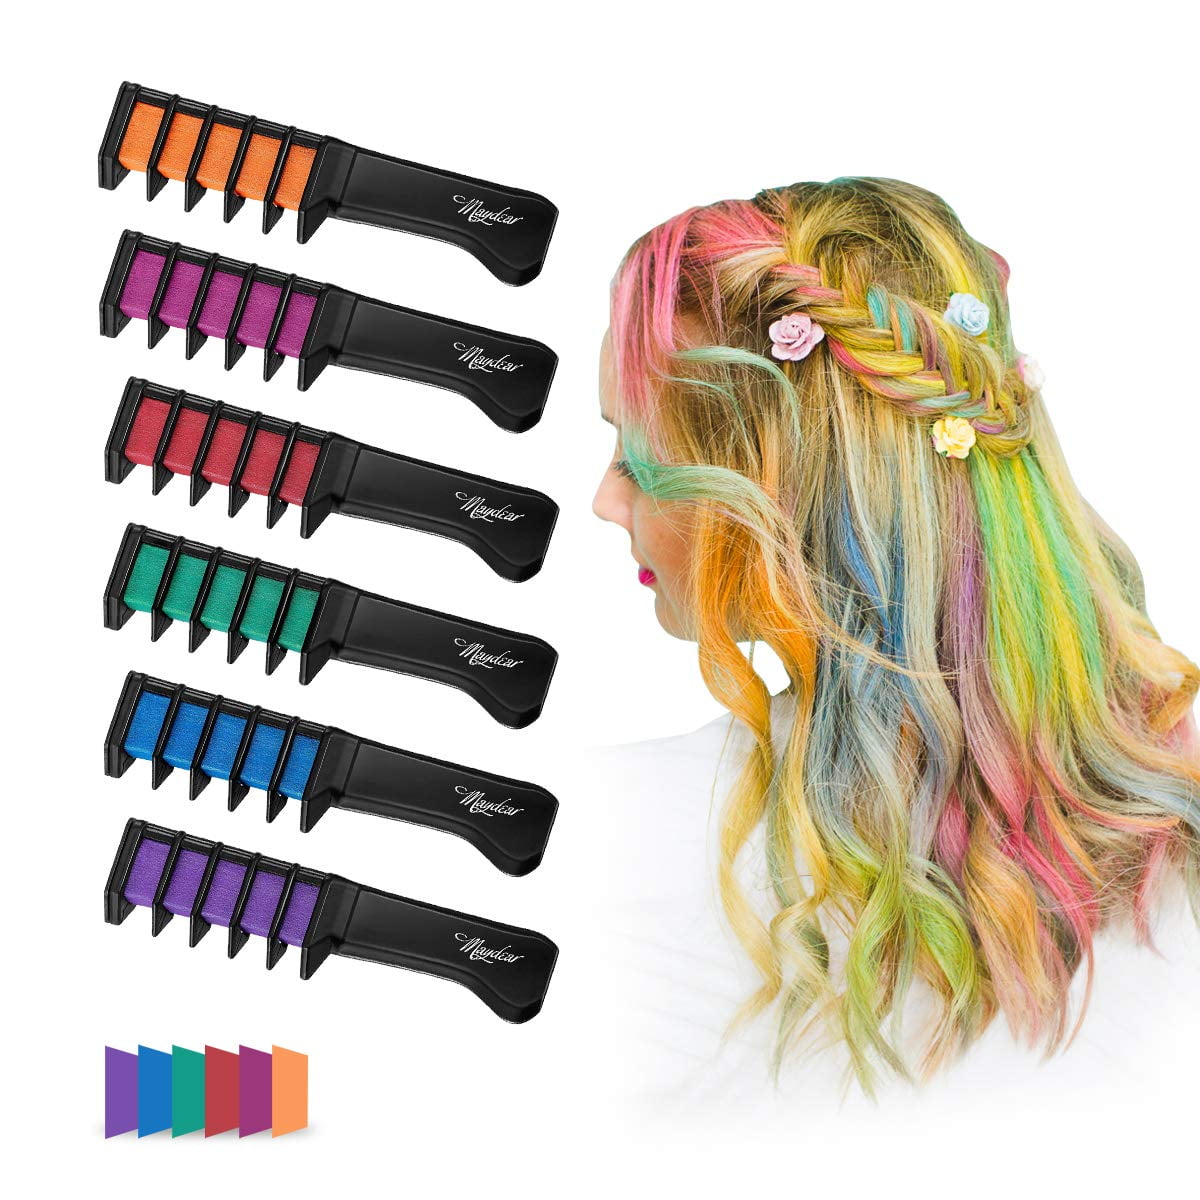  Glow Temporary Hair Chalk Comb, Glow in The Black Light  Washable Hair Color Comb for Girls Kids Non-Toxic Hair Dye for Birthday  Halloween Cosplay Party : Beauty & Personal Care